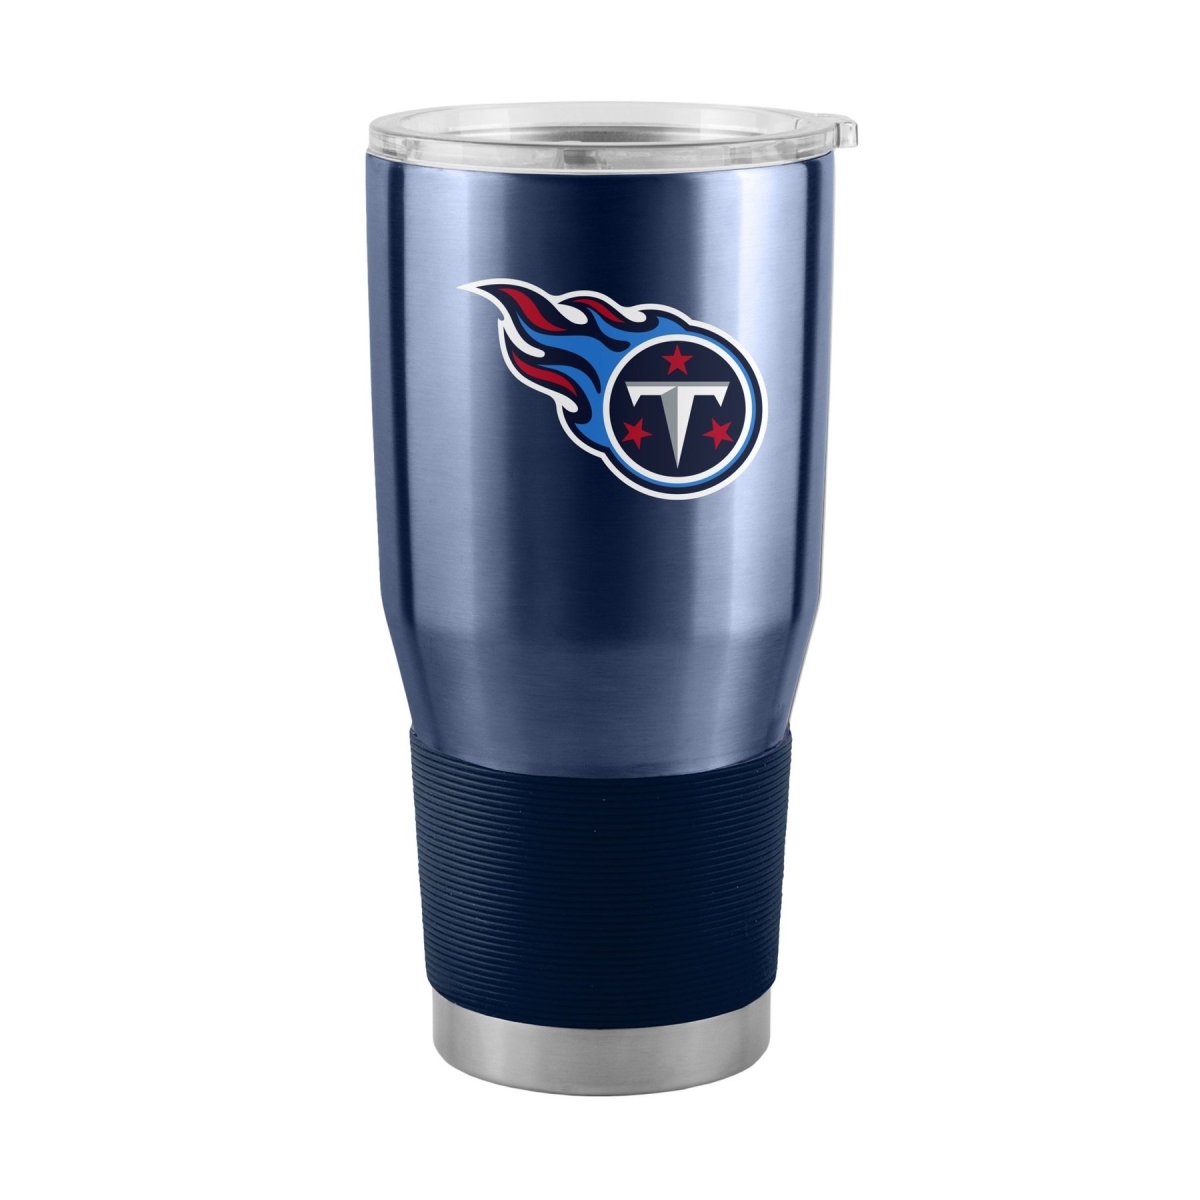 30 oz NFL Tennessee Titans Stainless Tumbler -  Moment-in-Time, MO3032885